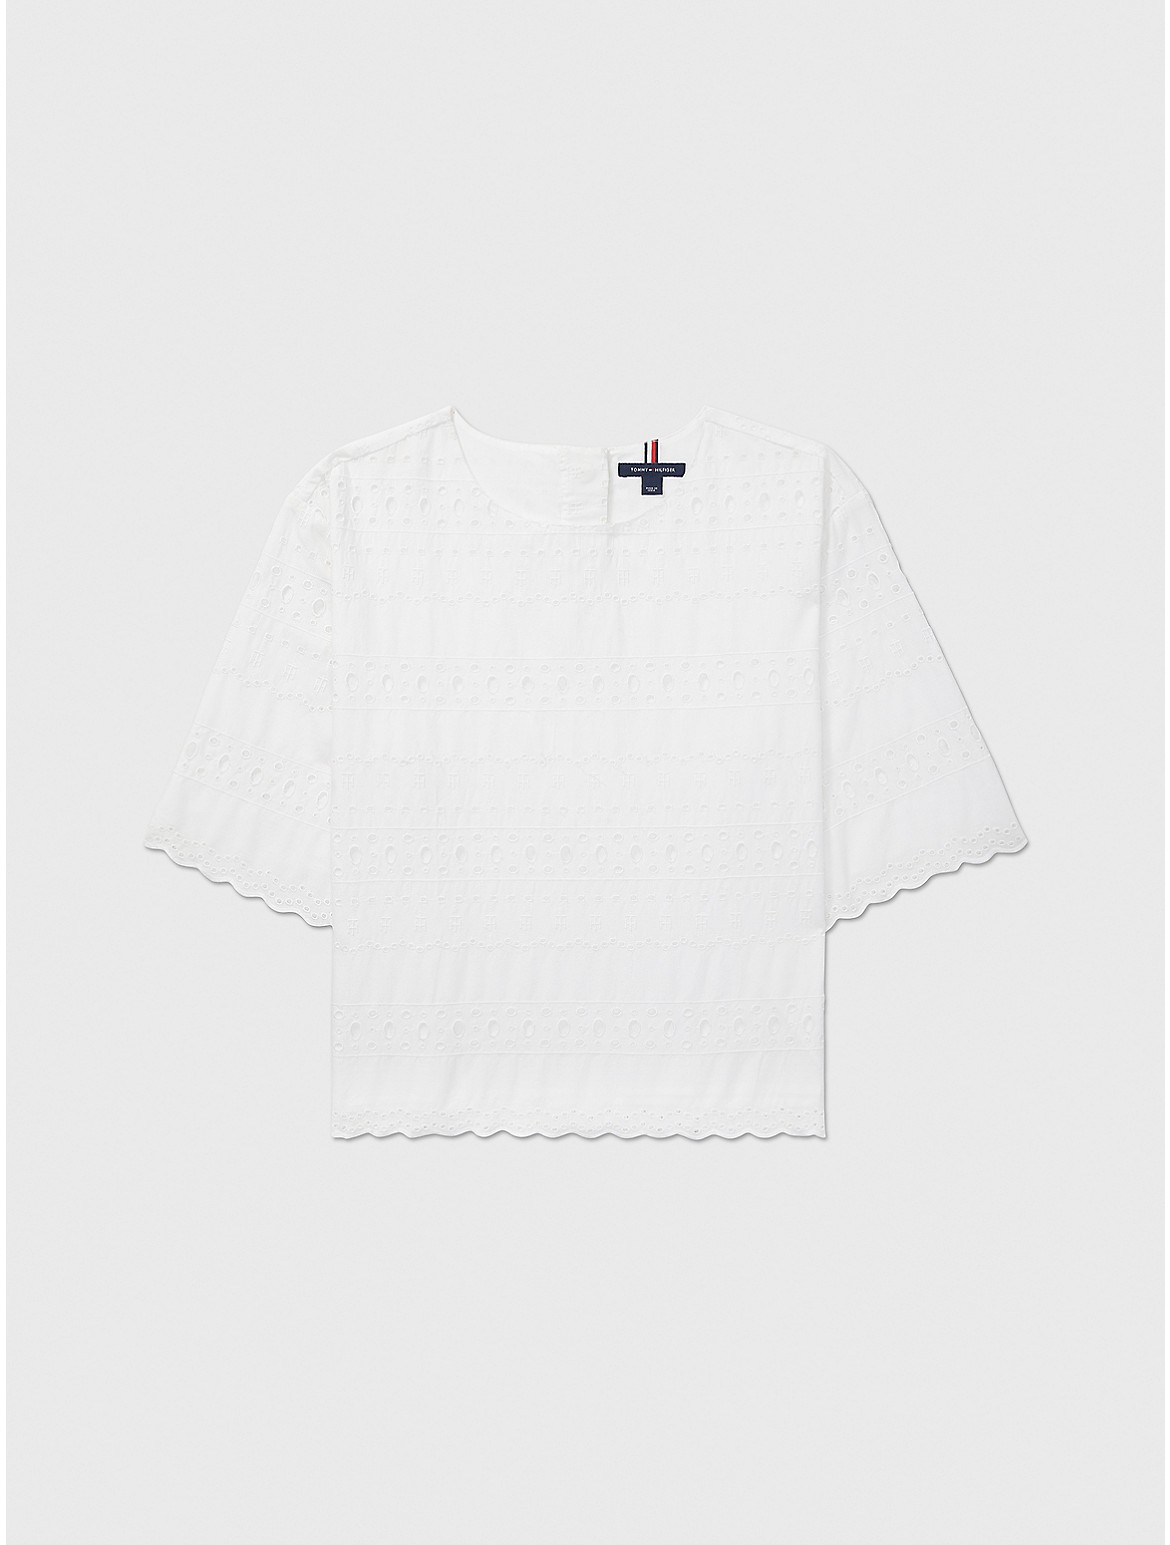 Tommy Hilfiger Women's Embroidered Top - White - M